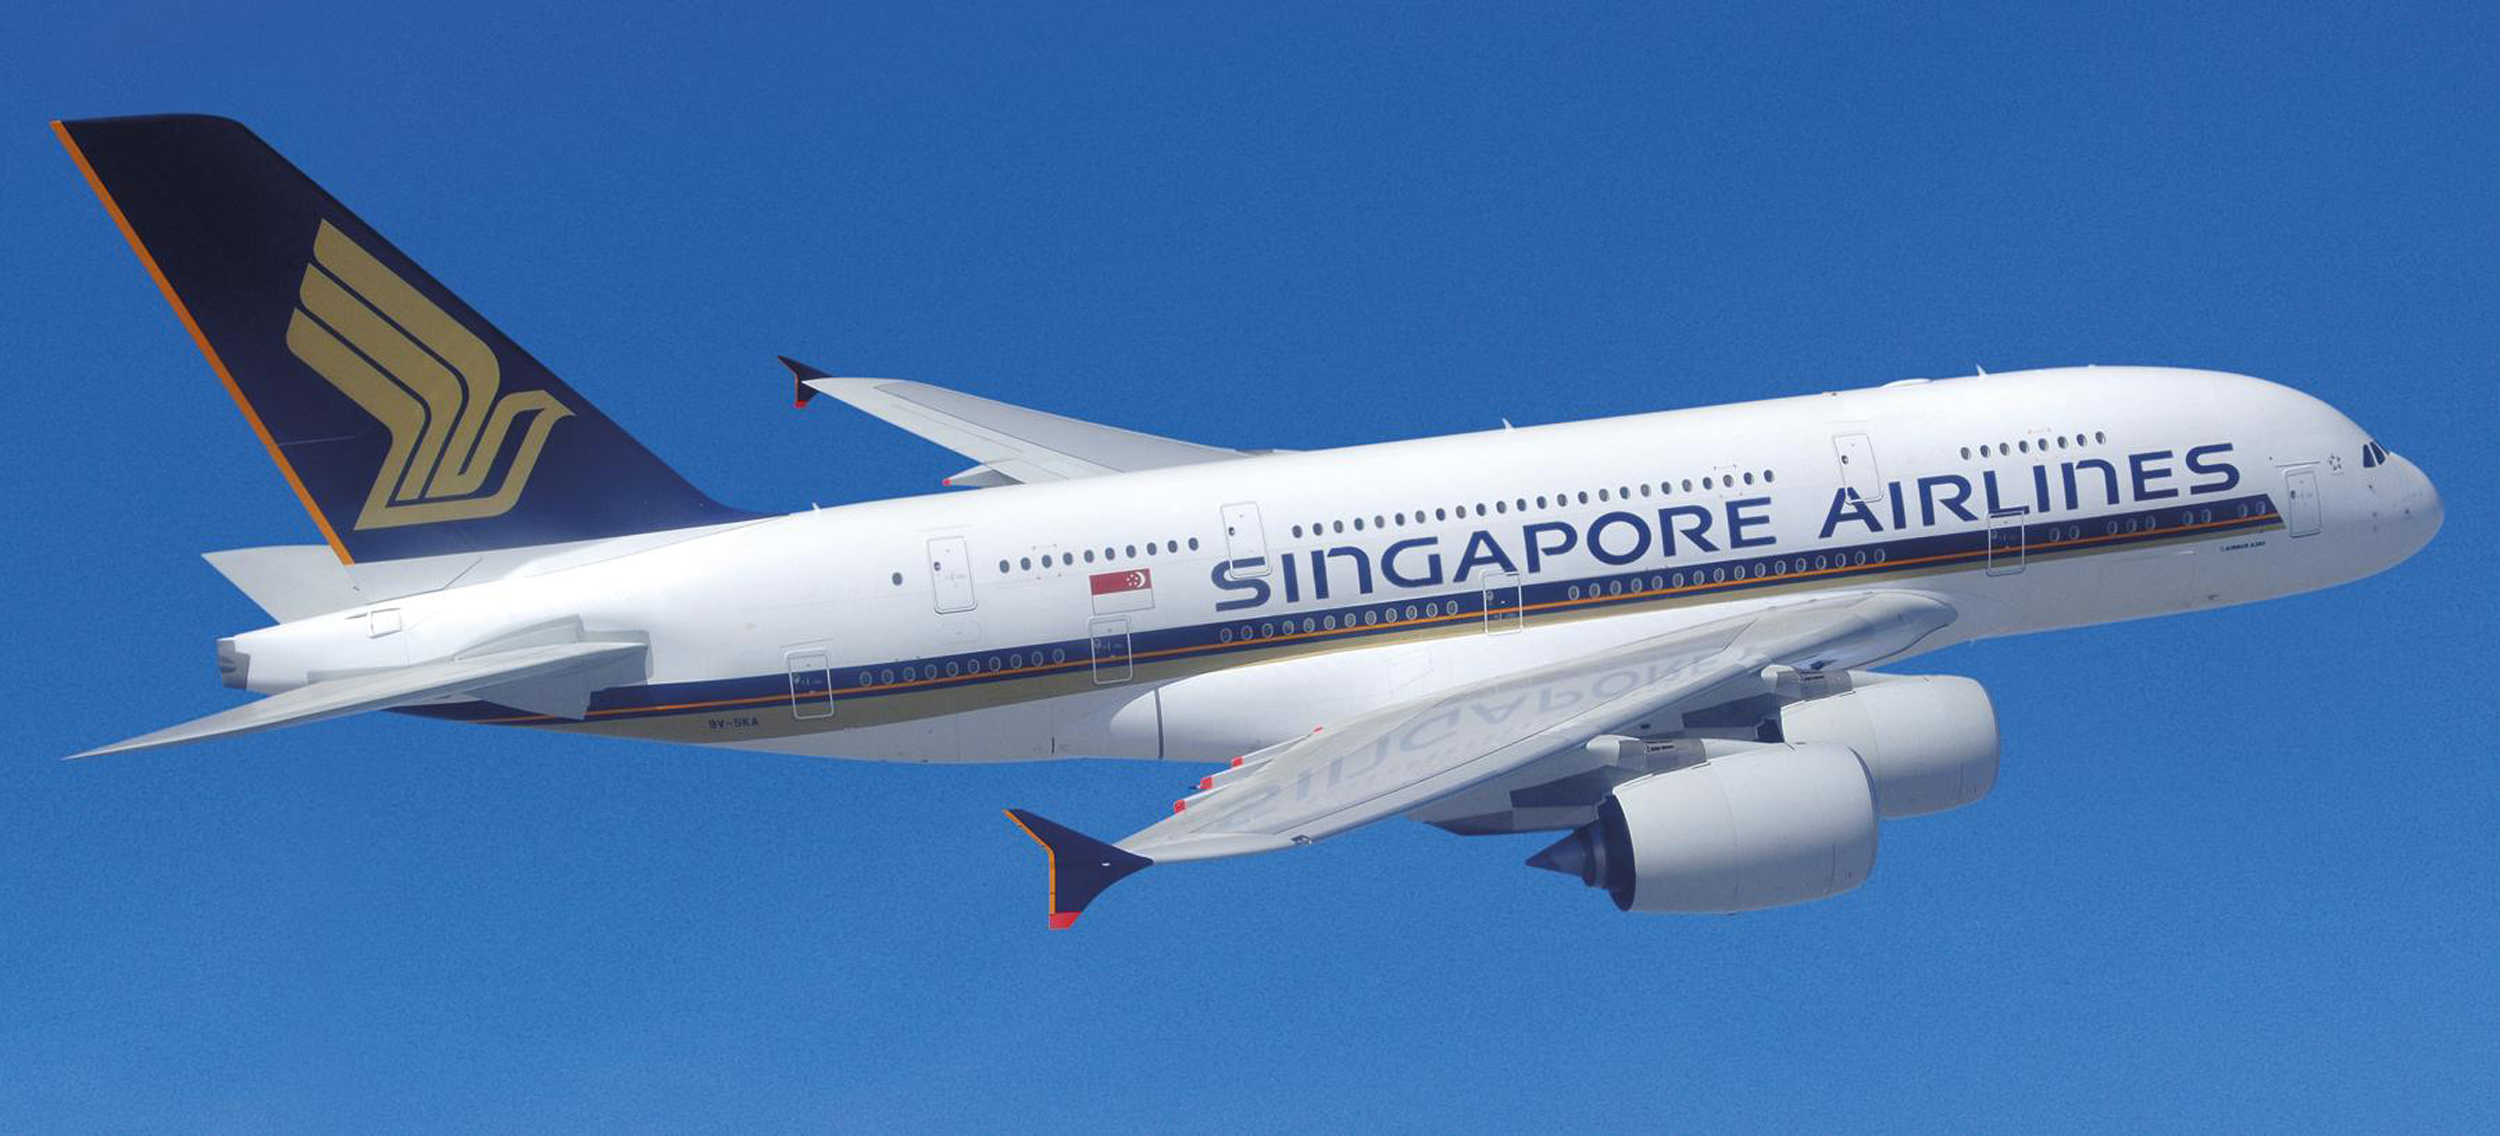 singapore_airlines_airplane